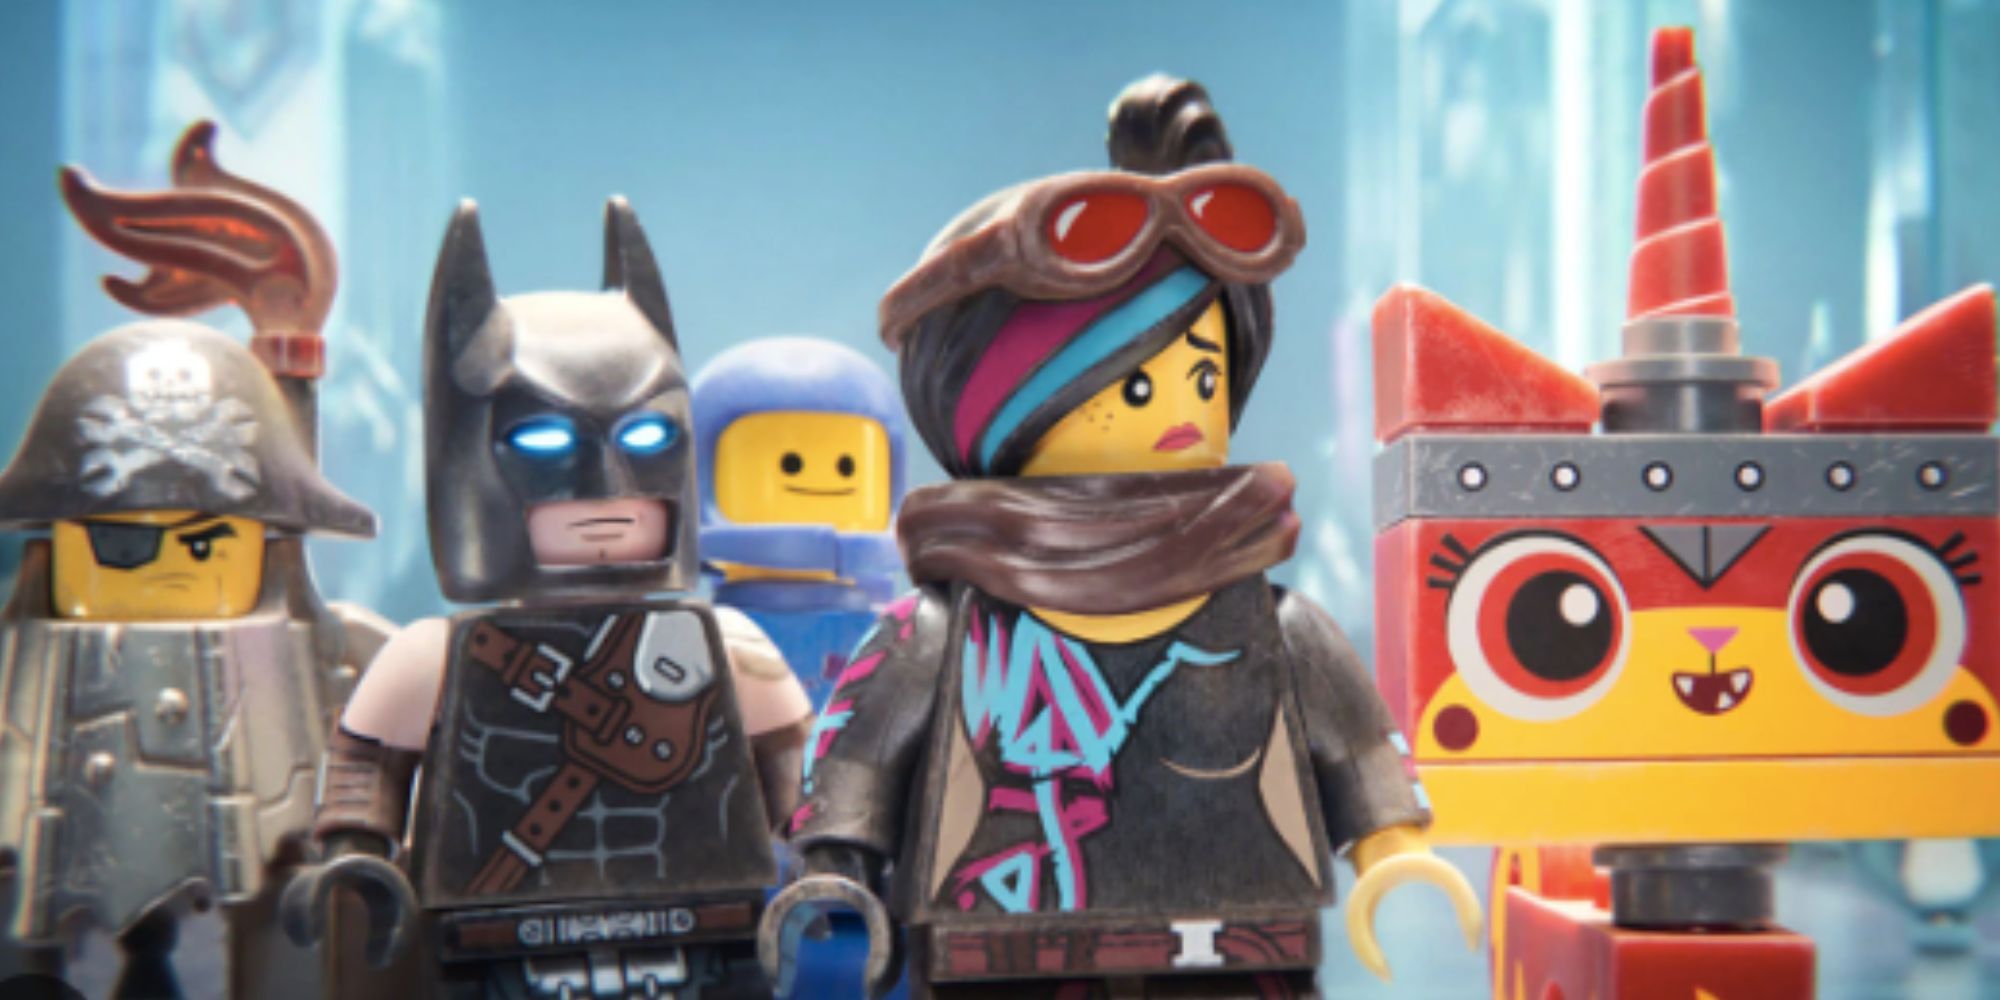 Elizabeth Banks as Wyldstyle with Batman and other Lego characters in The LEGO Movie 2